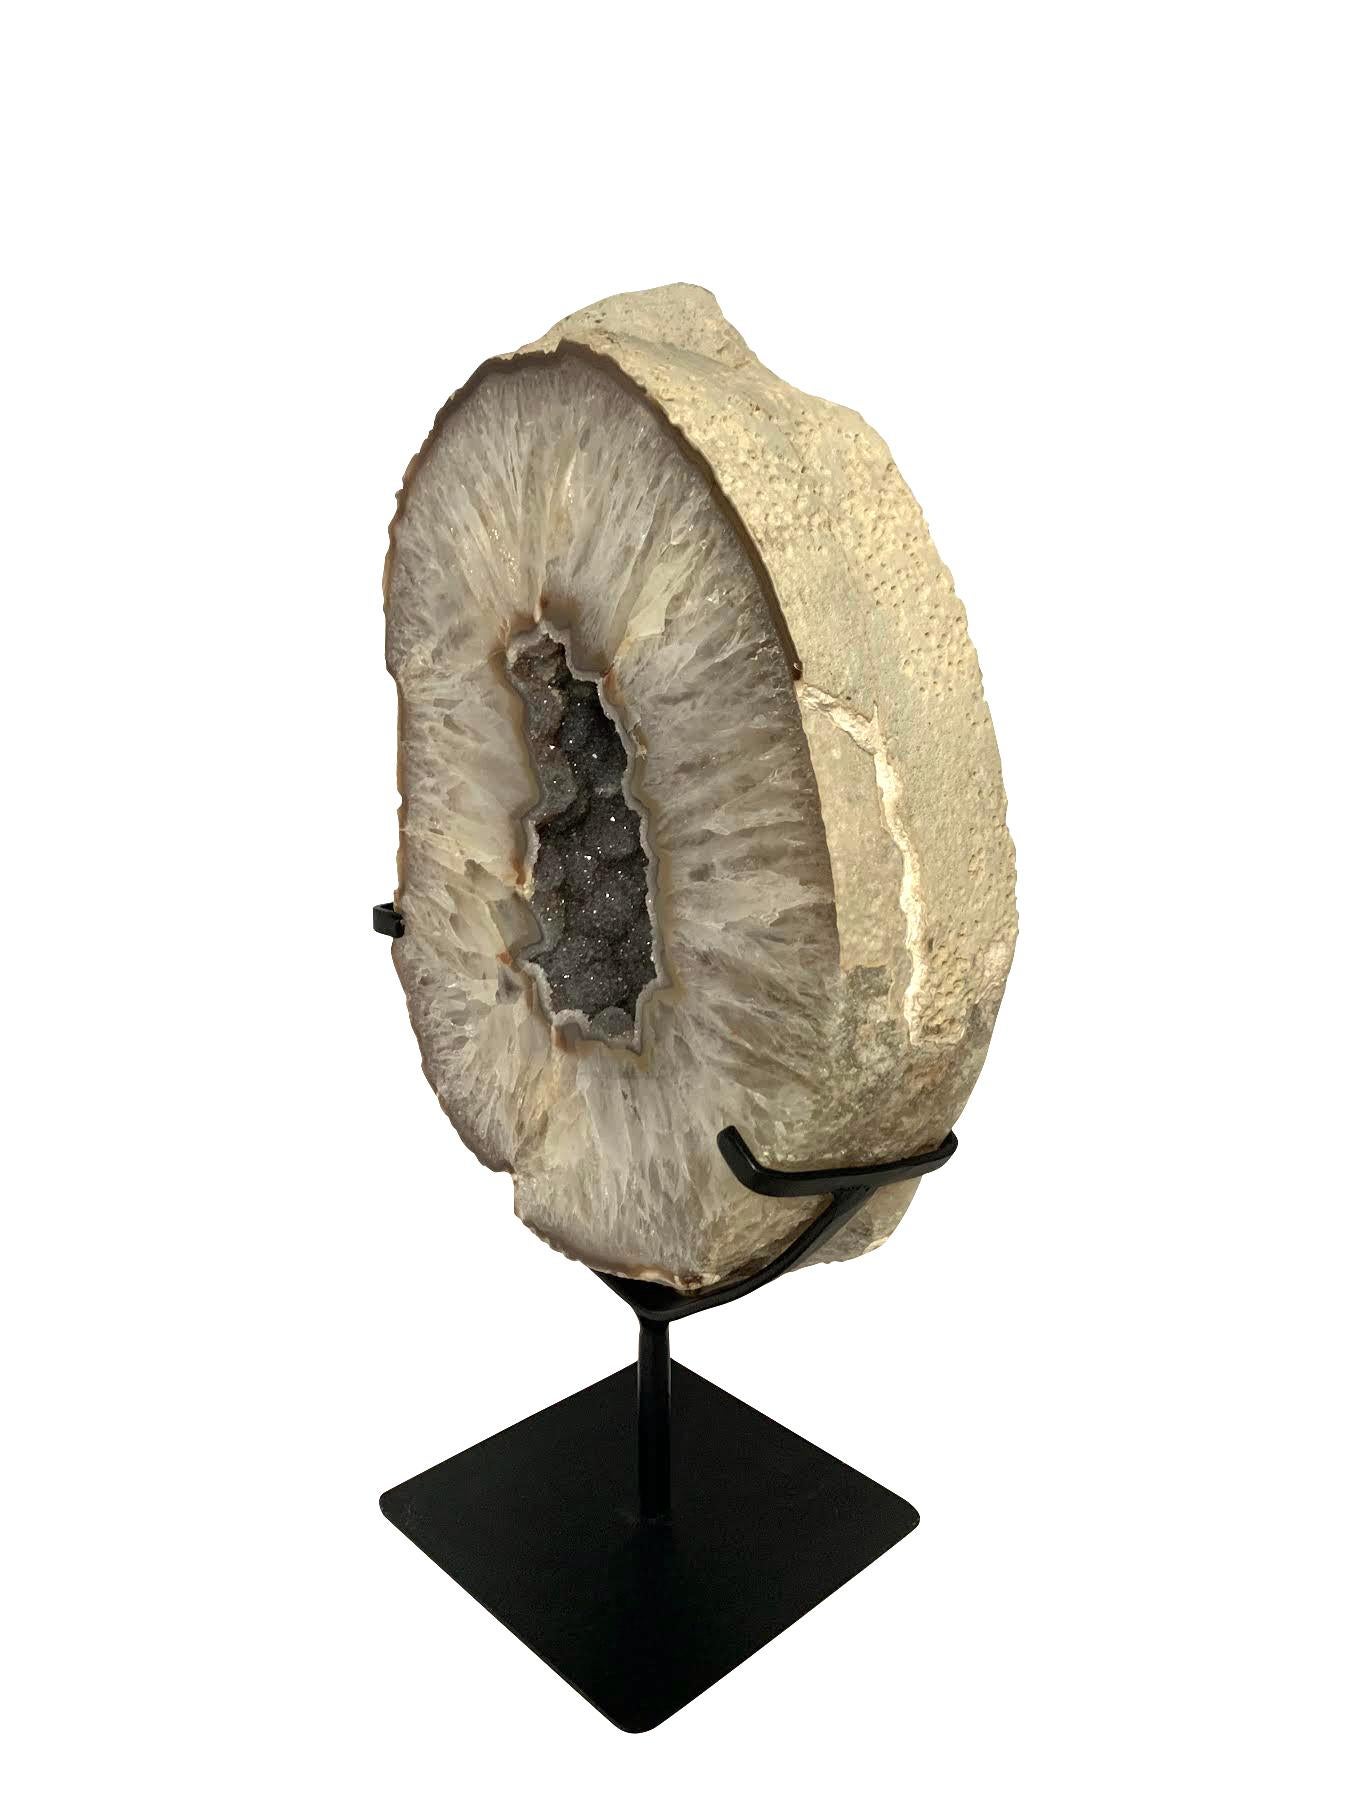 Prehistoric Brazilian thick agate geode on stand.
Center hole reveals beautiful natural silver crystals.
Metal stand measures 6